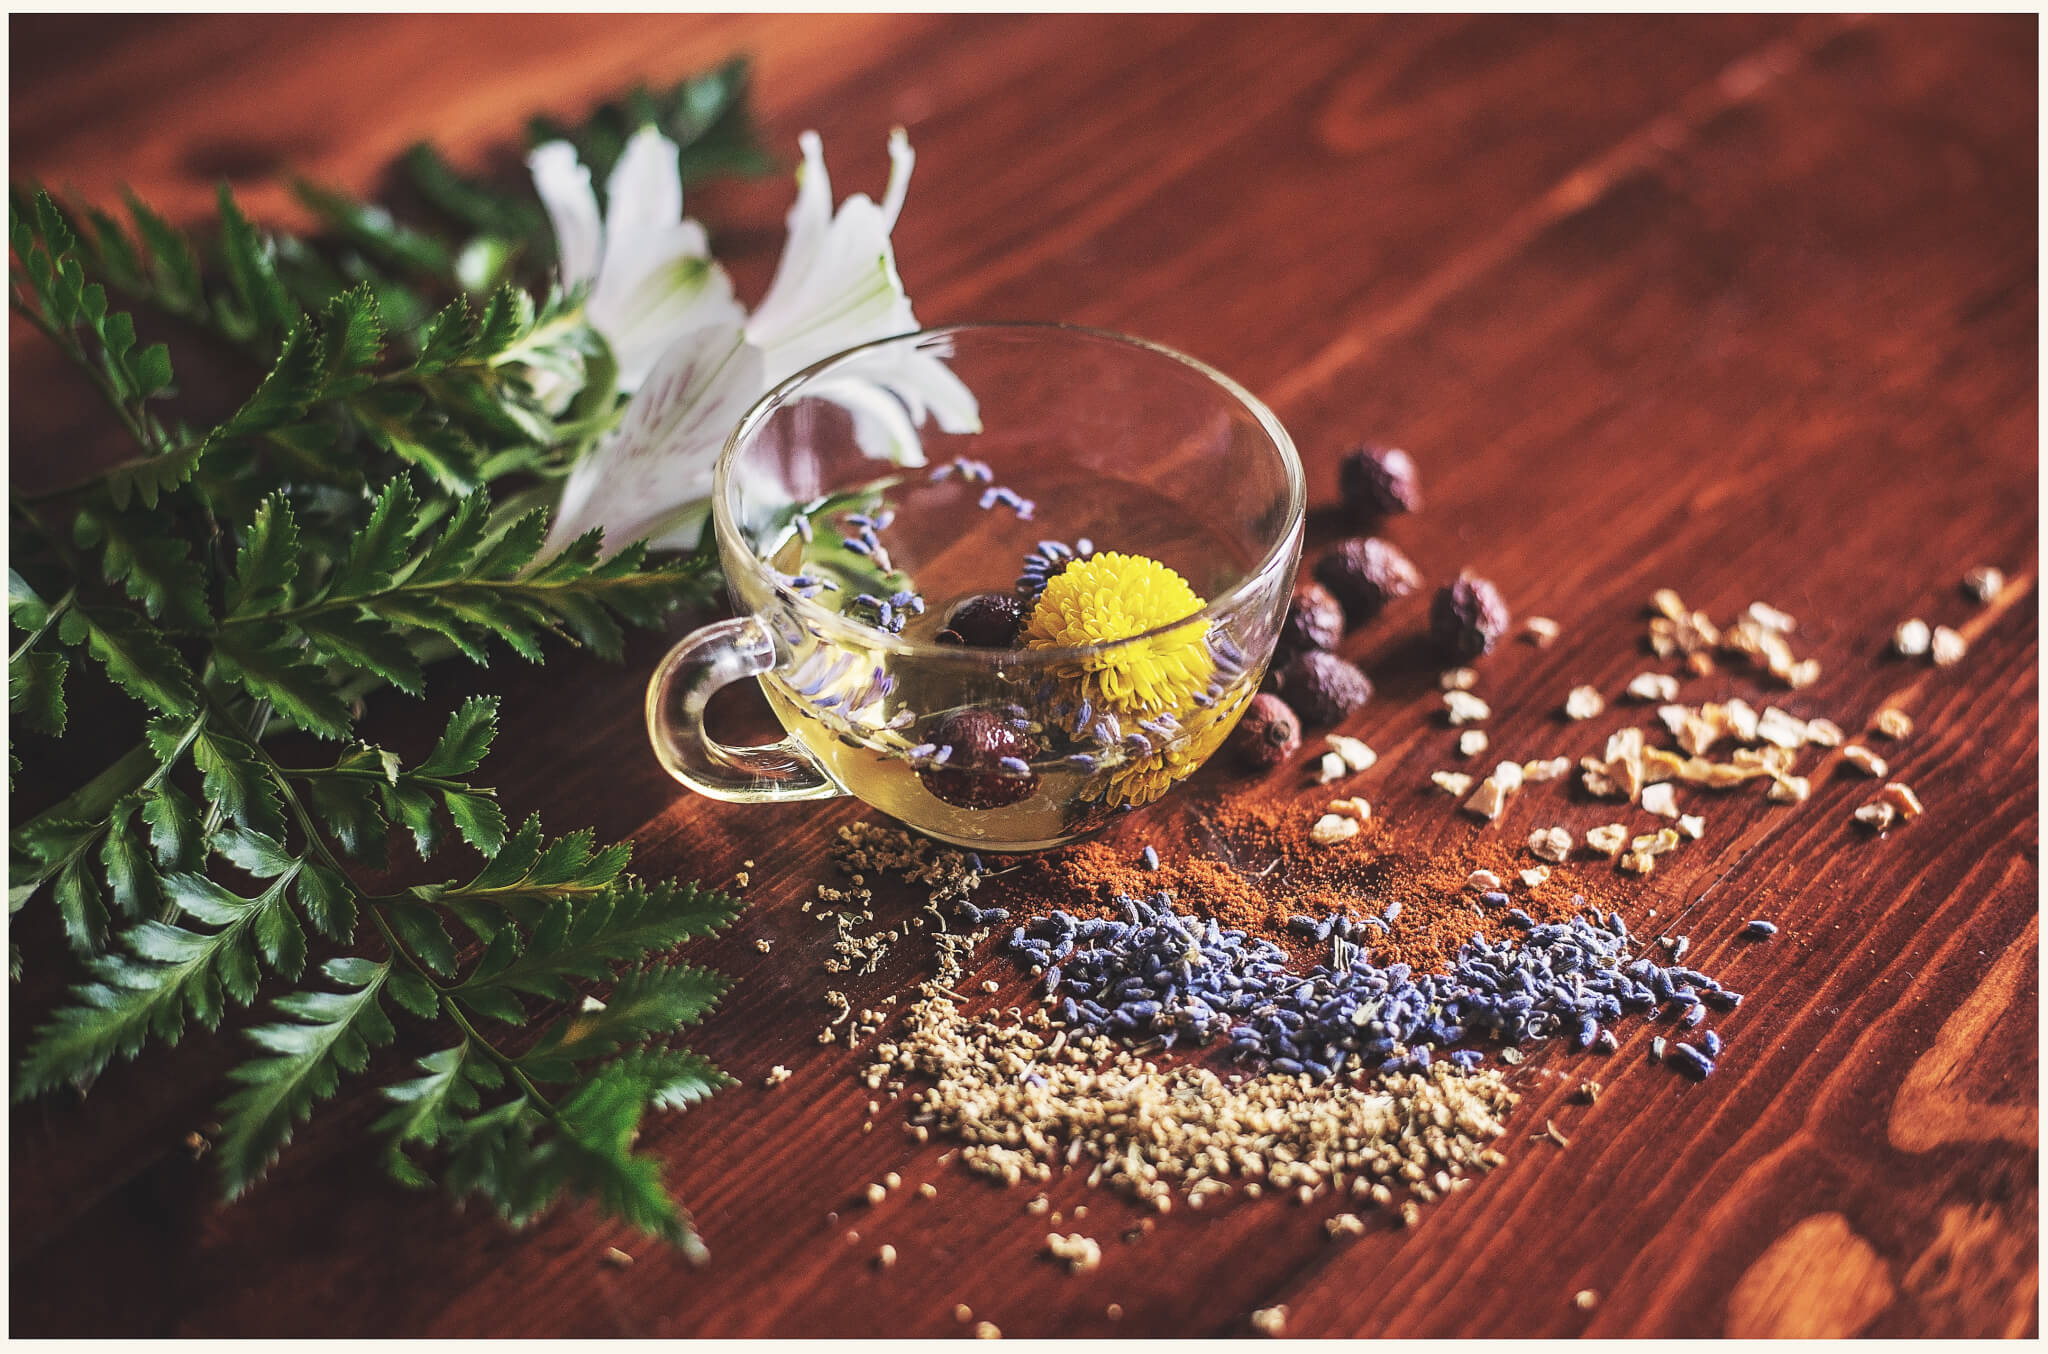 Nuherbs launches a wholesale B2B E-Commerce platform for dietary supplements with Spree Commerce